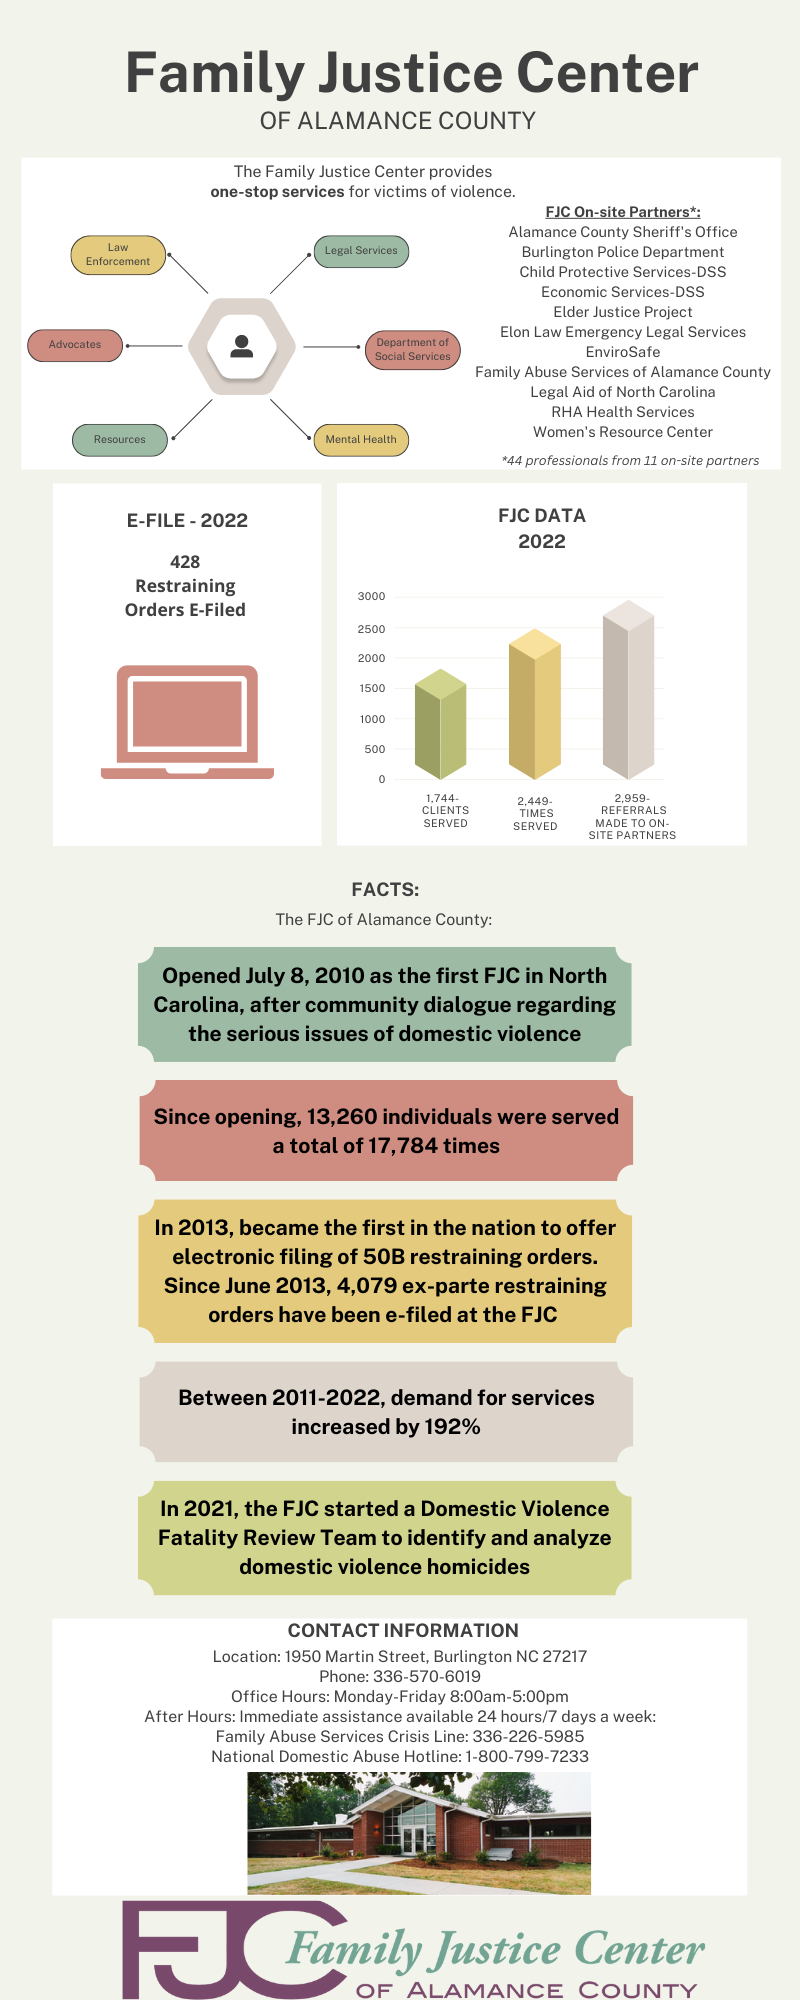 Infographic showing the impact of the FJC. The Family Justice Center provides one-stop services for victims of violence. FJC On-Site partners listed on the infographic can be found on the "Partners" page of this website. 428 restraining orders were electronically filed in 2022. In 2022, 1,744 individual clients were served, clients were provided services 2,449 times, and 2,959 referrals were made to on-site partners. The FJC opened July 8, 2010 as the first FJC in NC, after community dialogue regarding the serious issues of domestic violence. Since opening, 13,260 individuals were served a total of 17,784 times. In 2013, the FJC became the first in the nation to offer electronic filing of 50B restraining orders. Since June 2013, 4,079 ex-parte orders have been filed at the FJC. Between 2011-2022, demand for services increased by 192%. In 2021, the FJC started a Domestic Violence Fatality Review Team to identify and analyze domestic violence homicides.